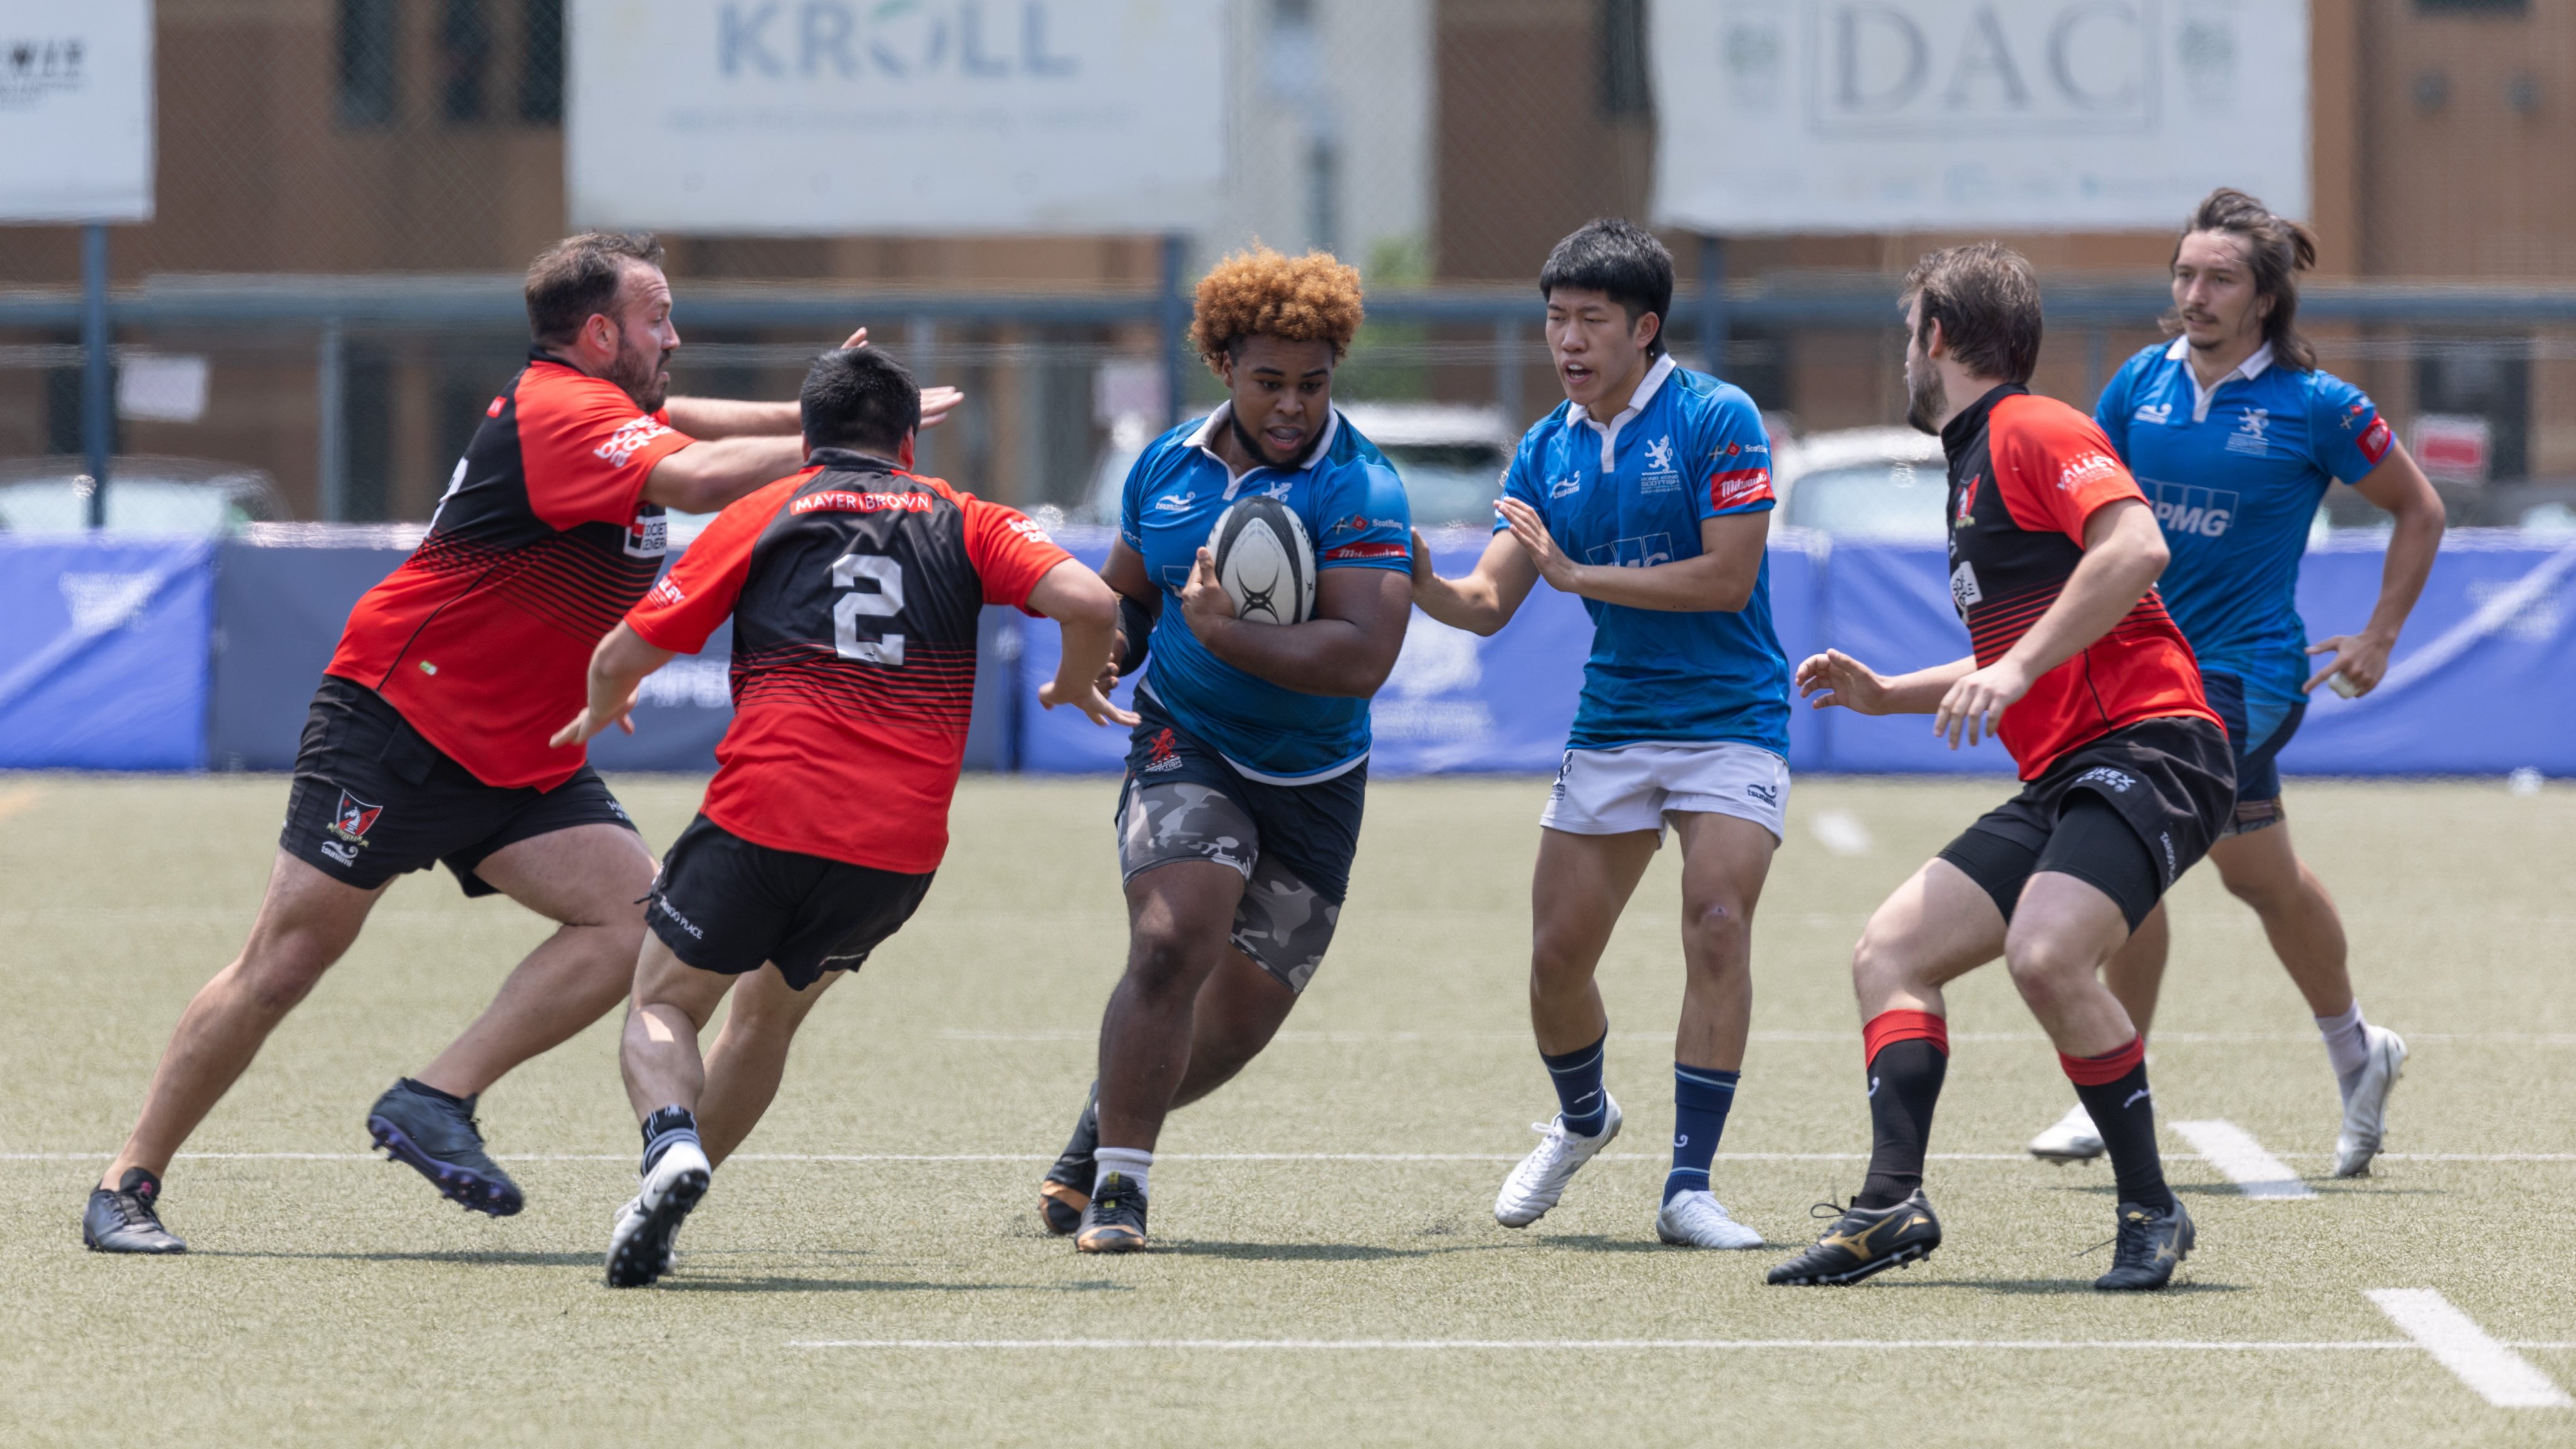 Edison Chukwudi of Hong Kong Scottish on the charge against Valley during the Fat Boy 10s. Photo: Keith Mulcahy